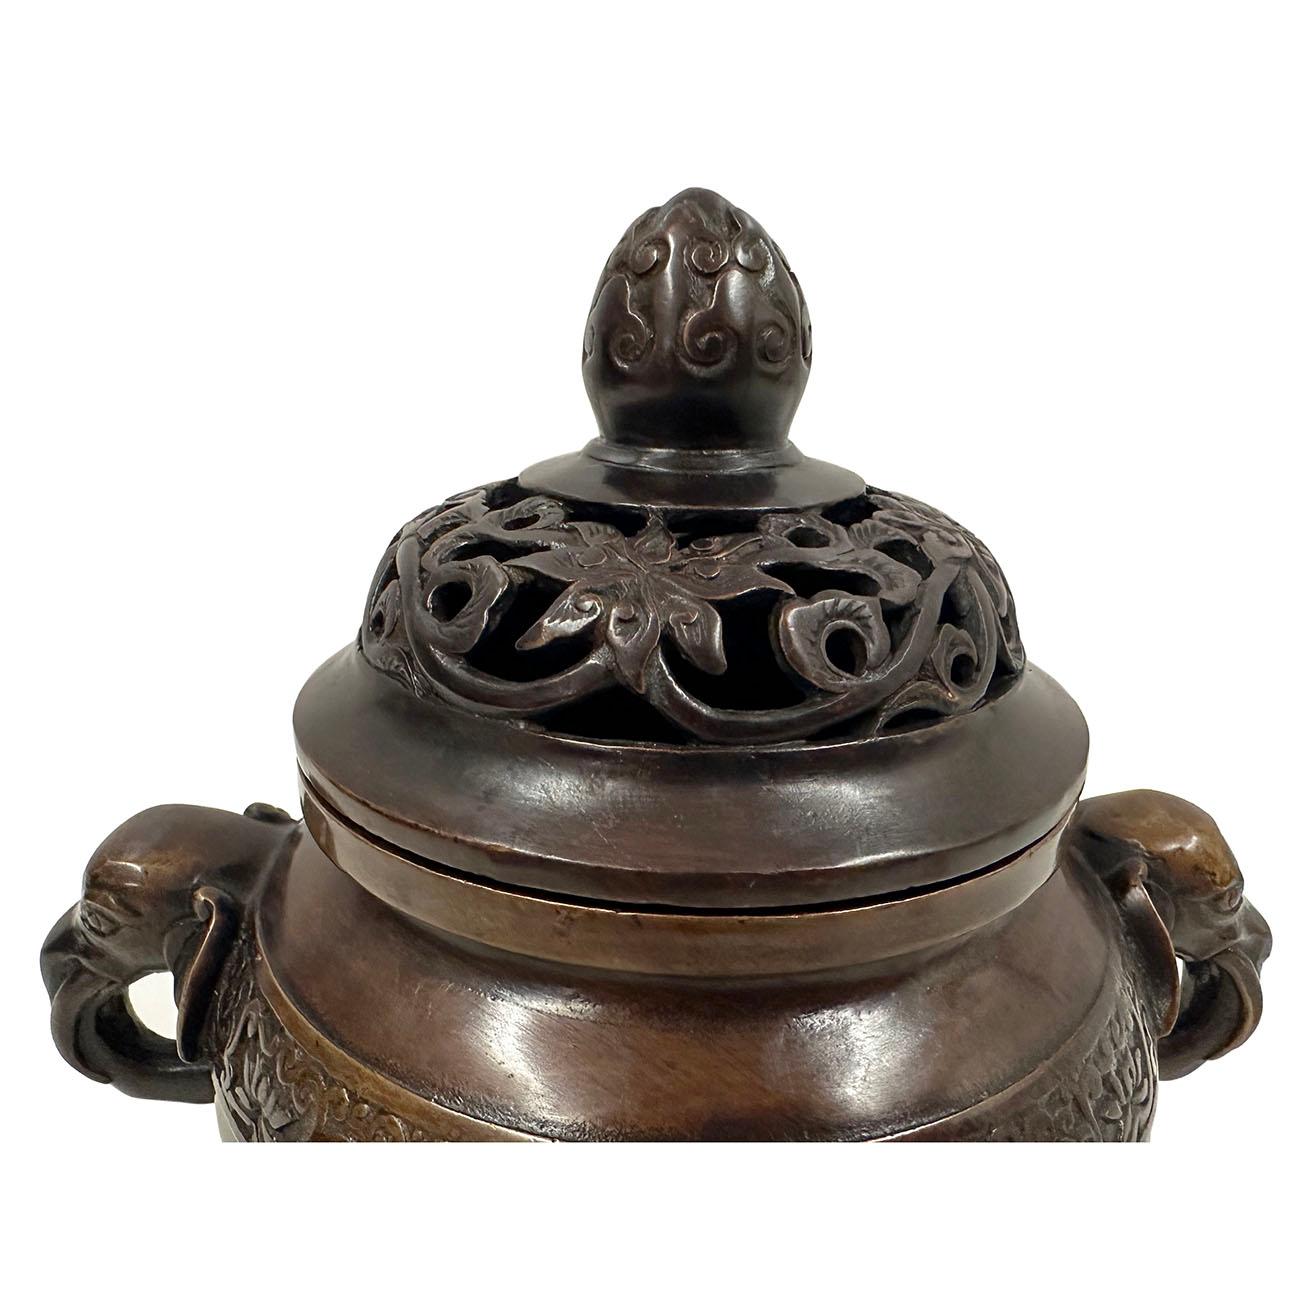 This magnificent Chinese Antique Carved Bronze incense burner has very detailed hand craft works around the body, elephants trunk as legs and handle and lotus bud on the lid of incense burner. It has very detailed art works around it. Open carved